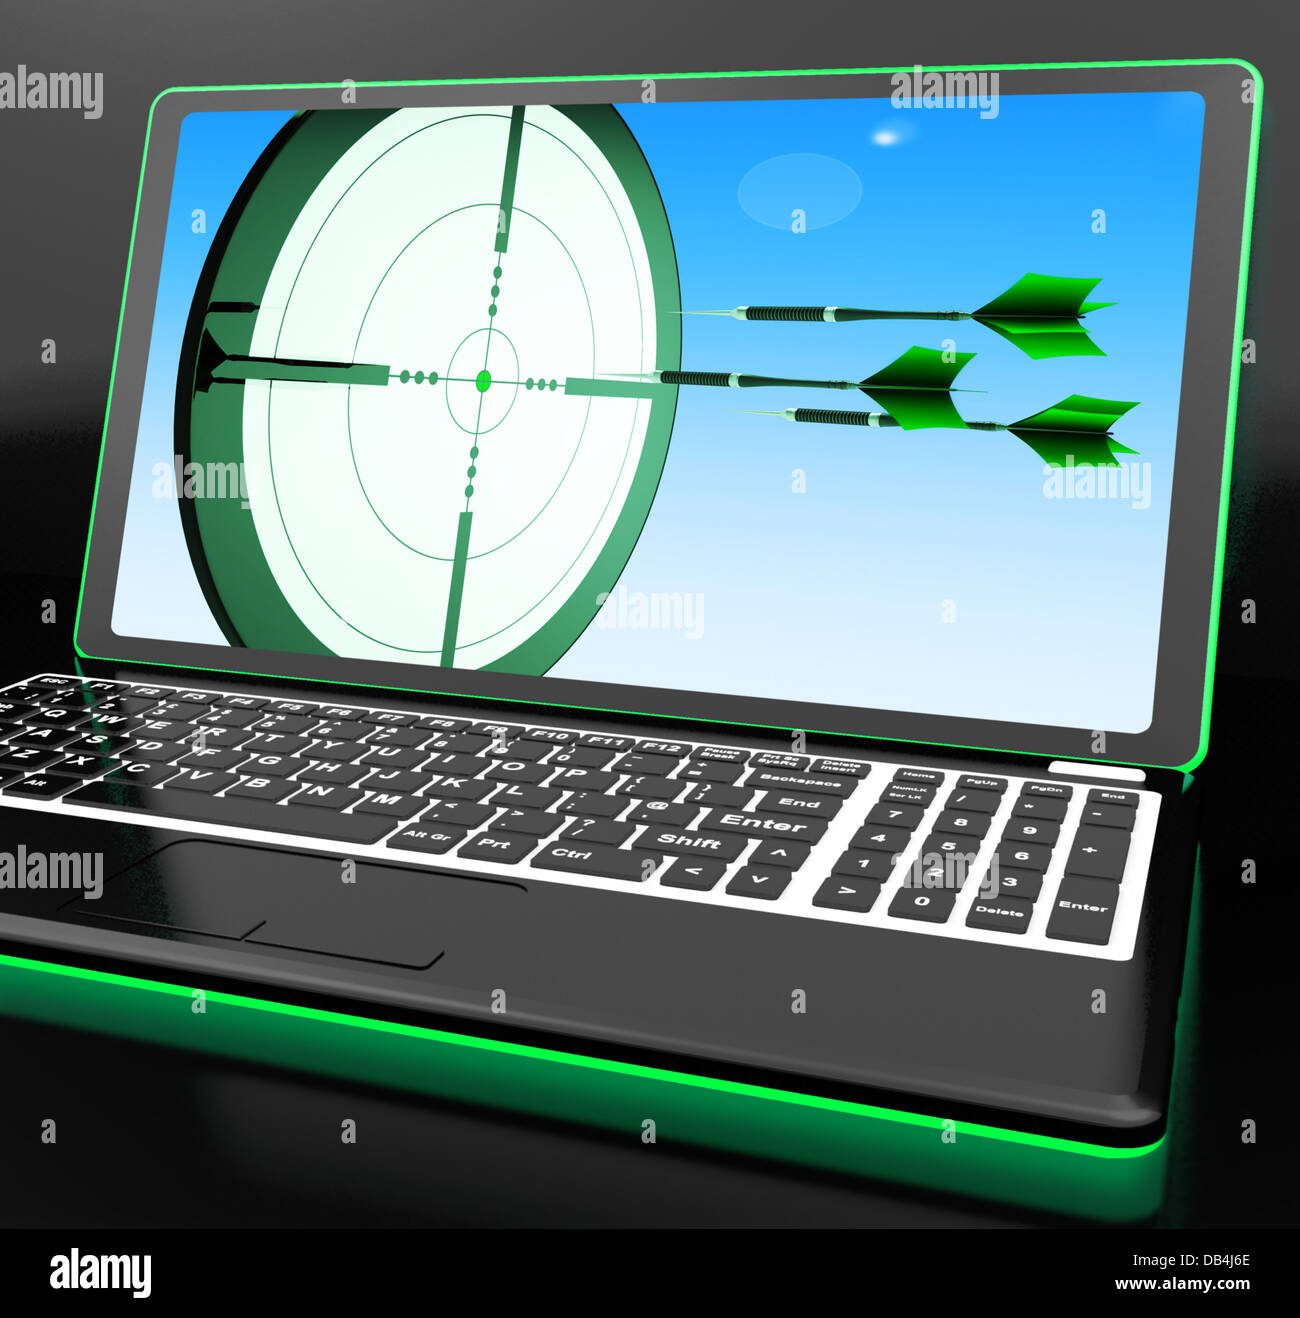 Arrows Aiming On Laptop Showing Extreme Accuracy Stock Photo